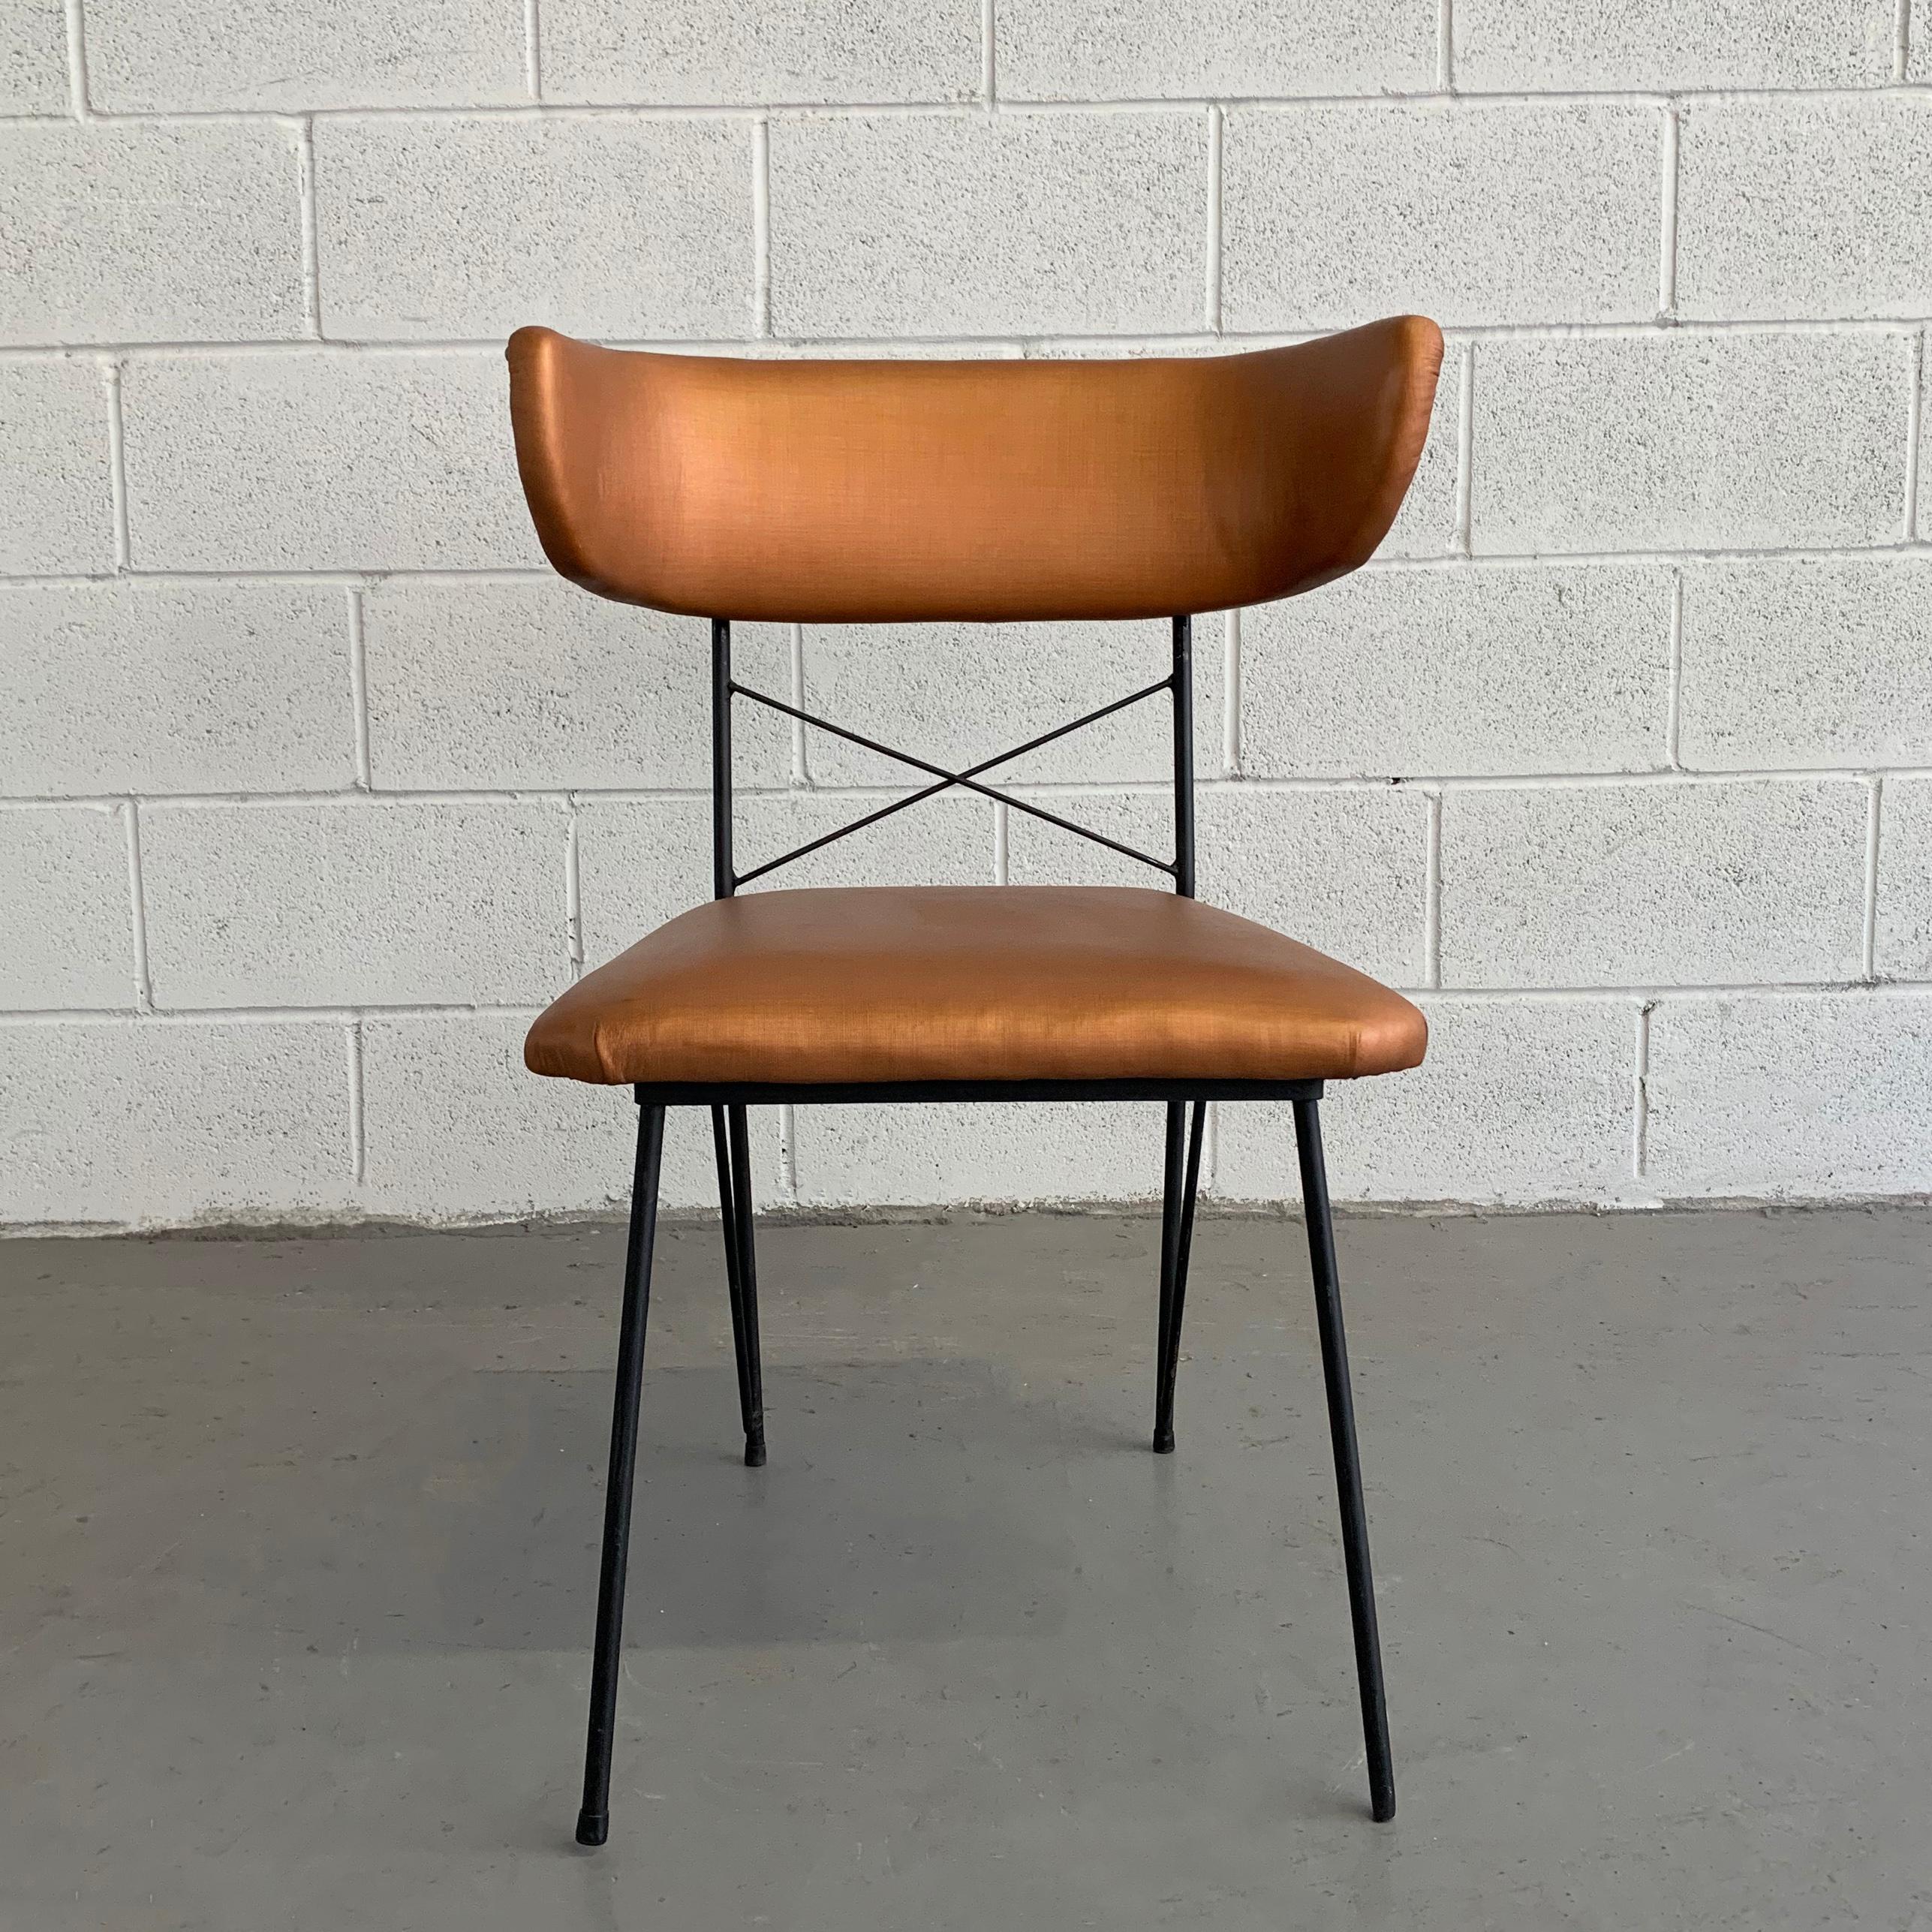 American Mid-Century Modern Upholstered Wrought Iron Side Chair